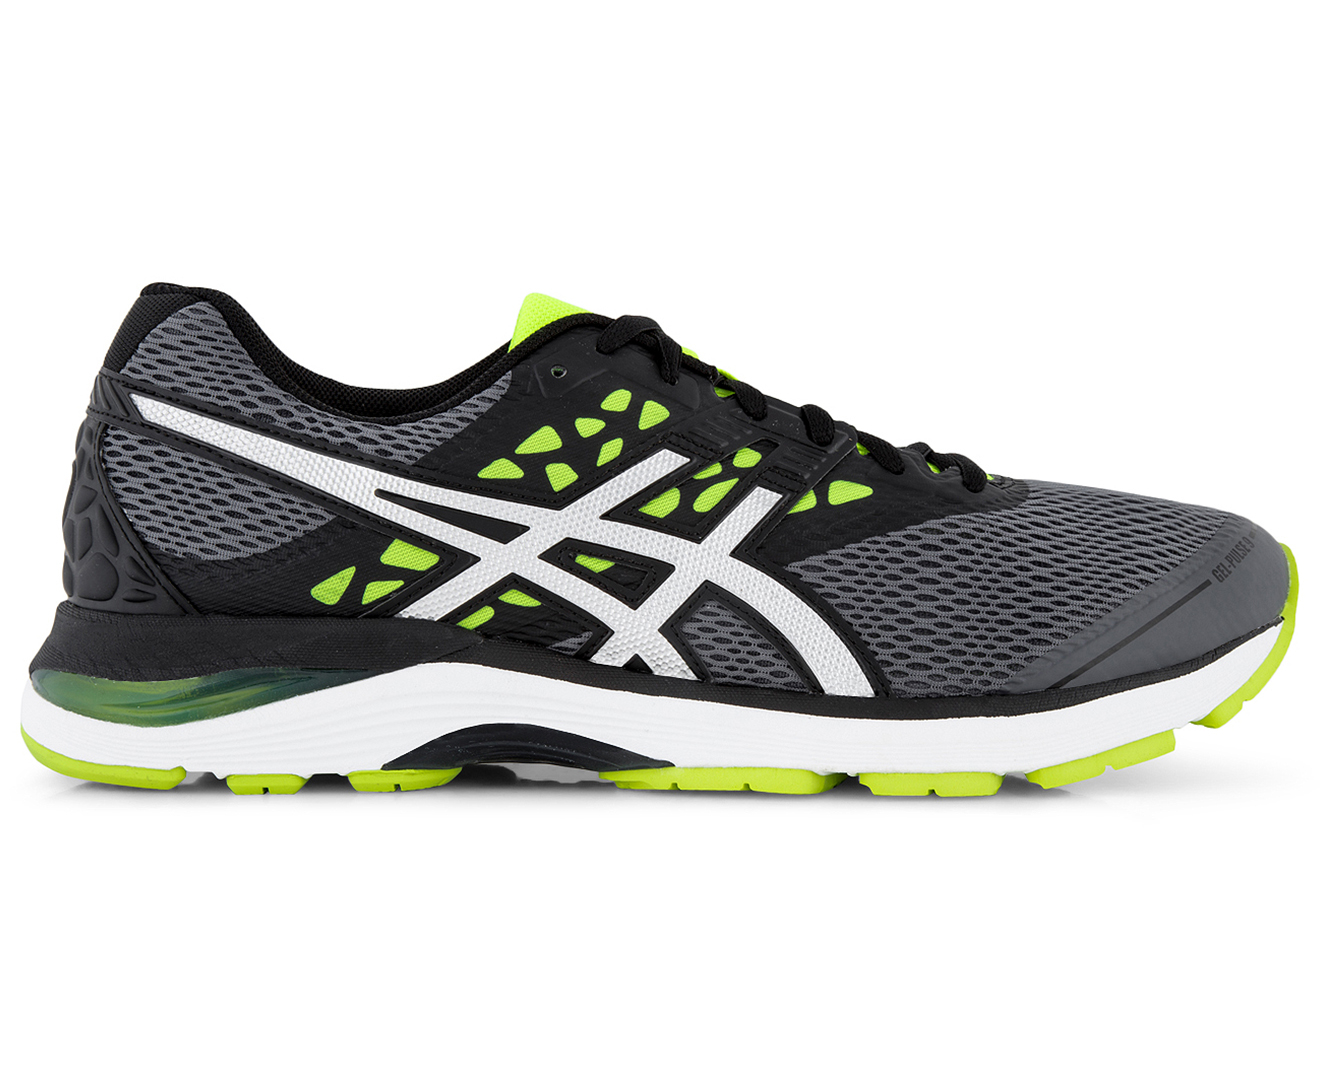 ASICS Men's GEL-Pulse 9 Shoe - Carbon/Silver/Safety Yellow | Catch.co.nz